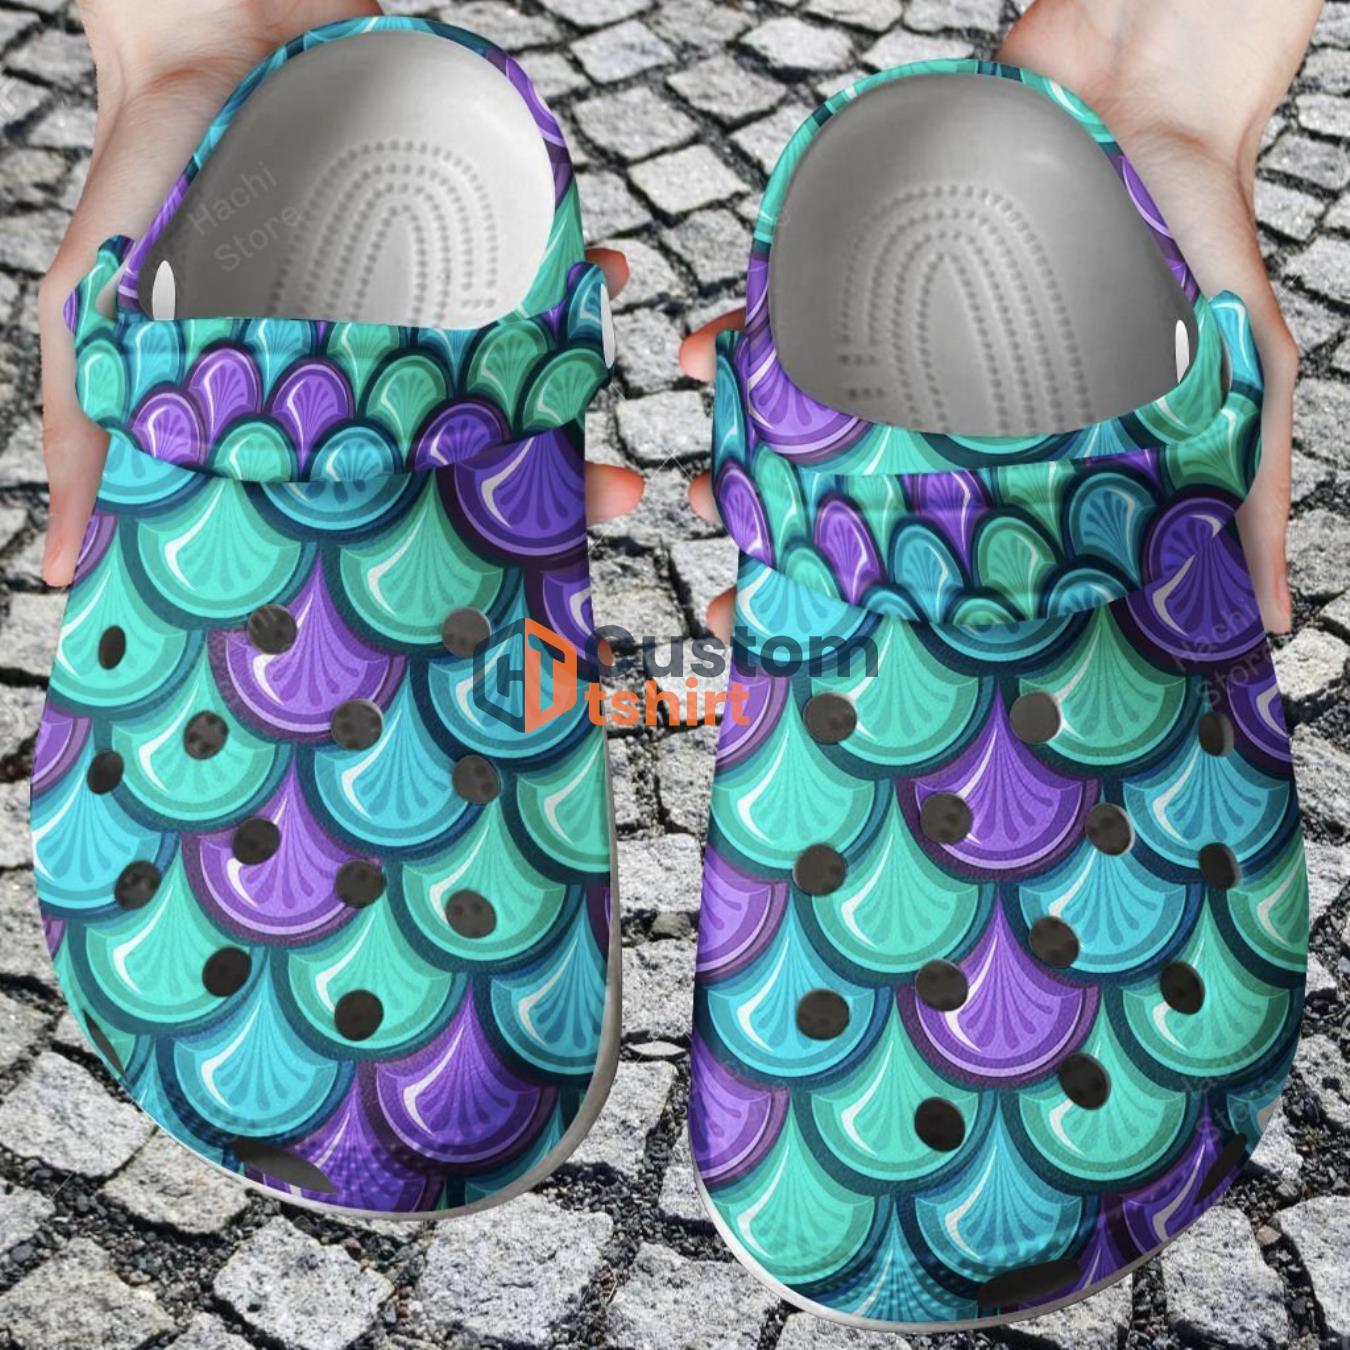 Mermaid Clog Shoes - Mermaid Fins Colorful Clog Shoes Product Photo 1 Product photo 1